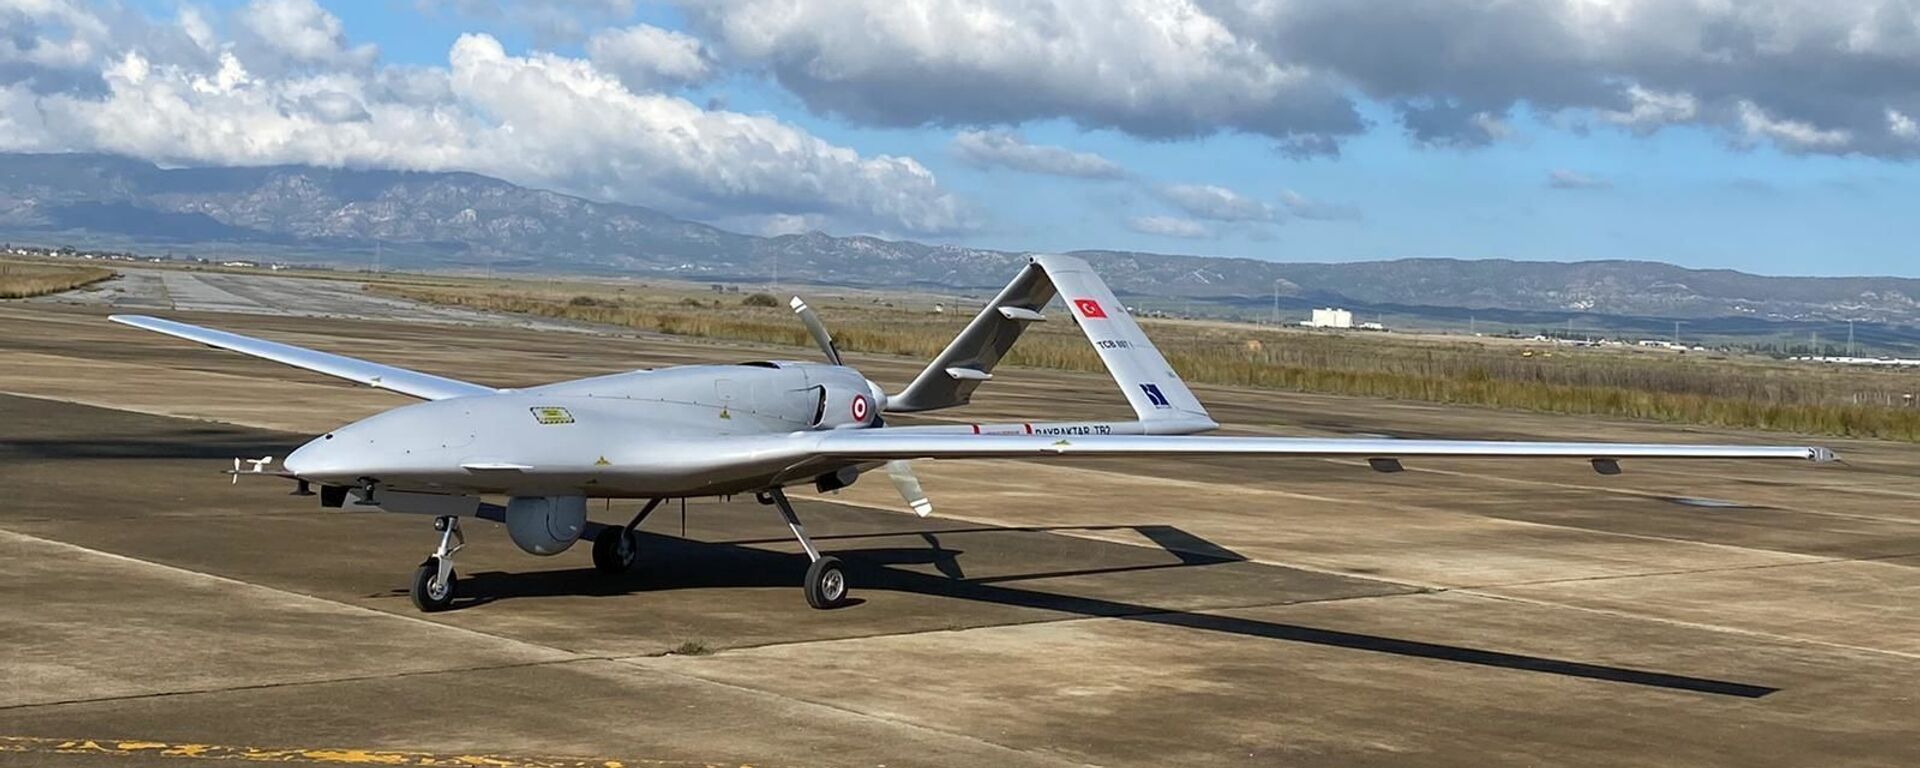 A Turkish-made Bayraktar TB2 drone is seen shortly after its landing at an airport in Gecitkala, known as Lefkoniko in Greek, in Cyprus, Monday, Dec. 16, 2019 - Sputnik International, 1920, 17.10.2020